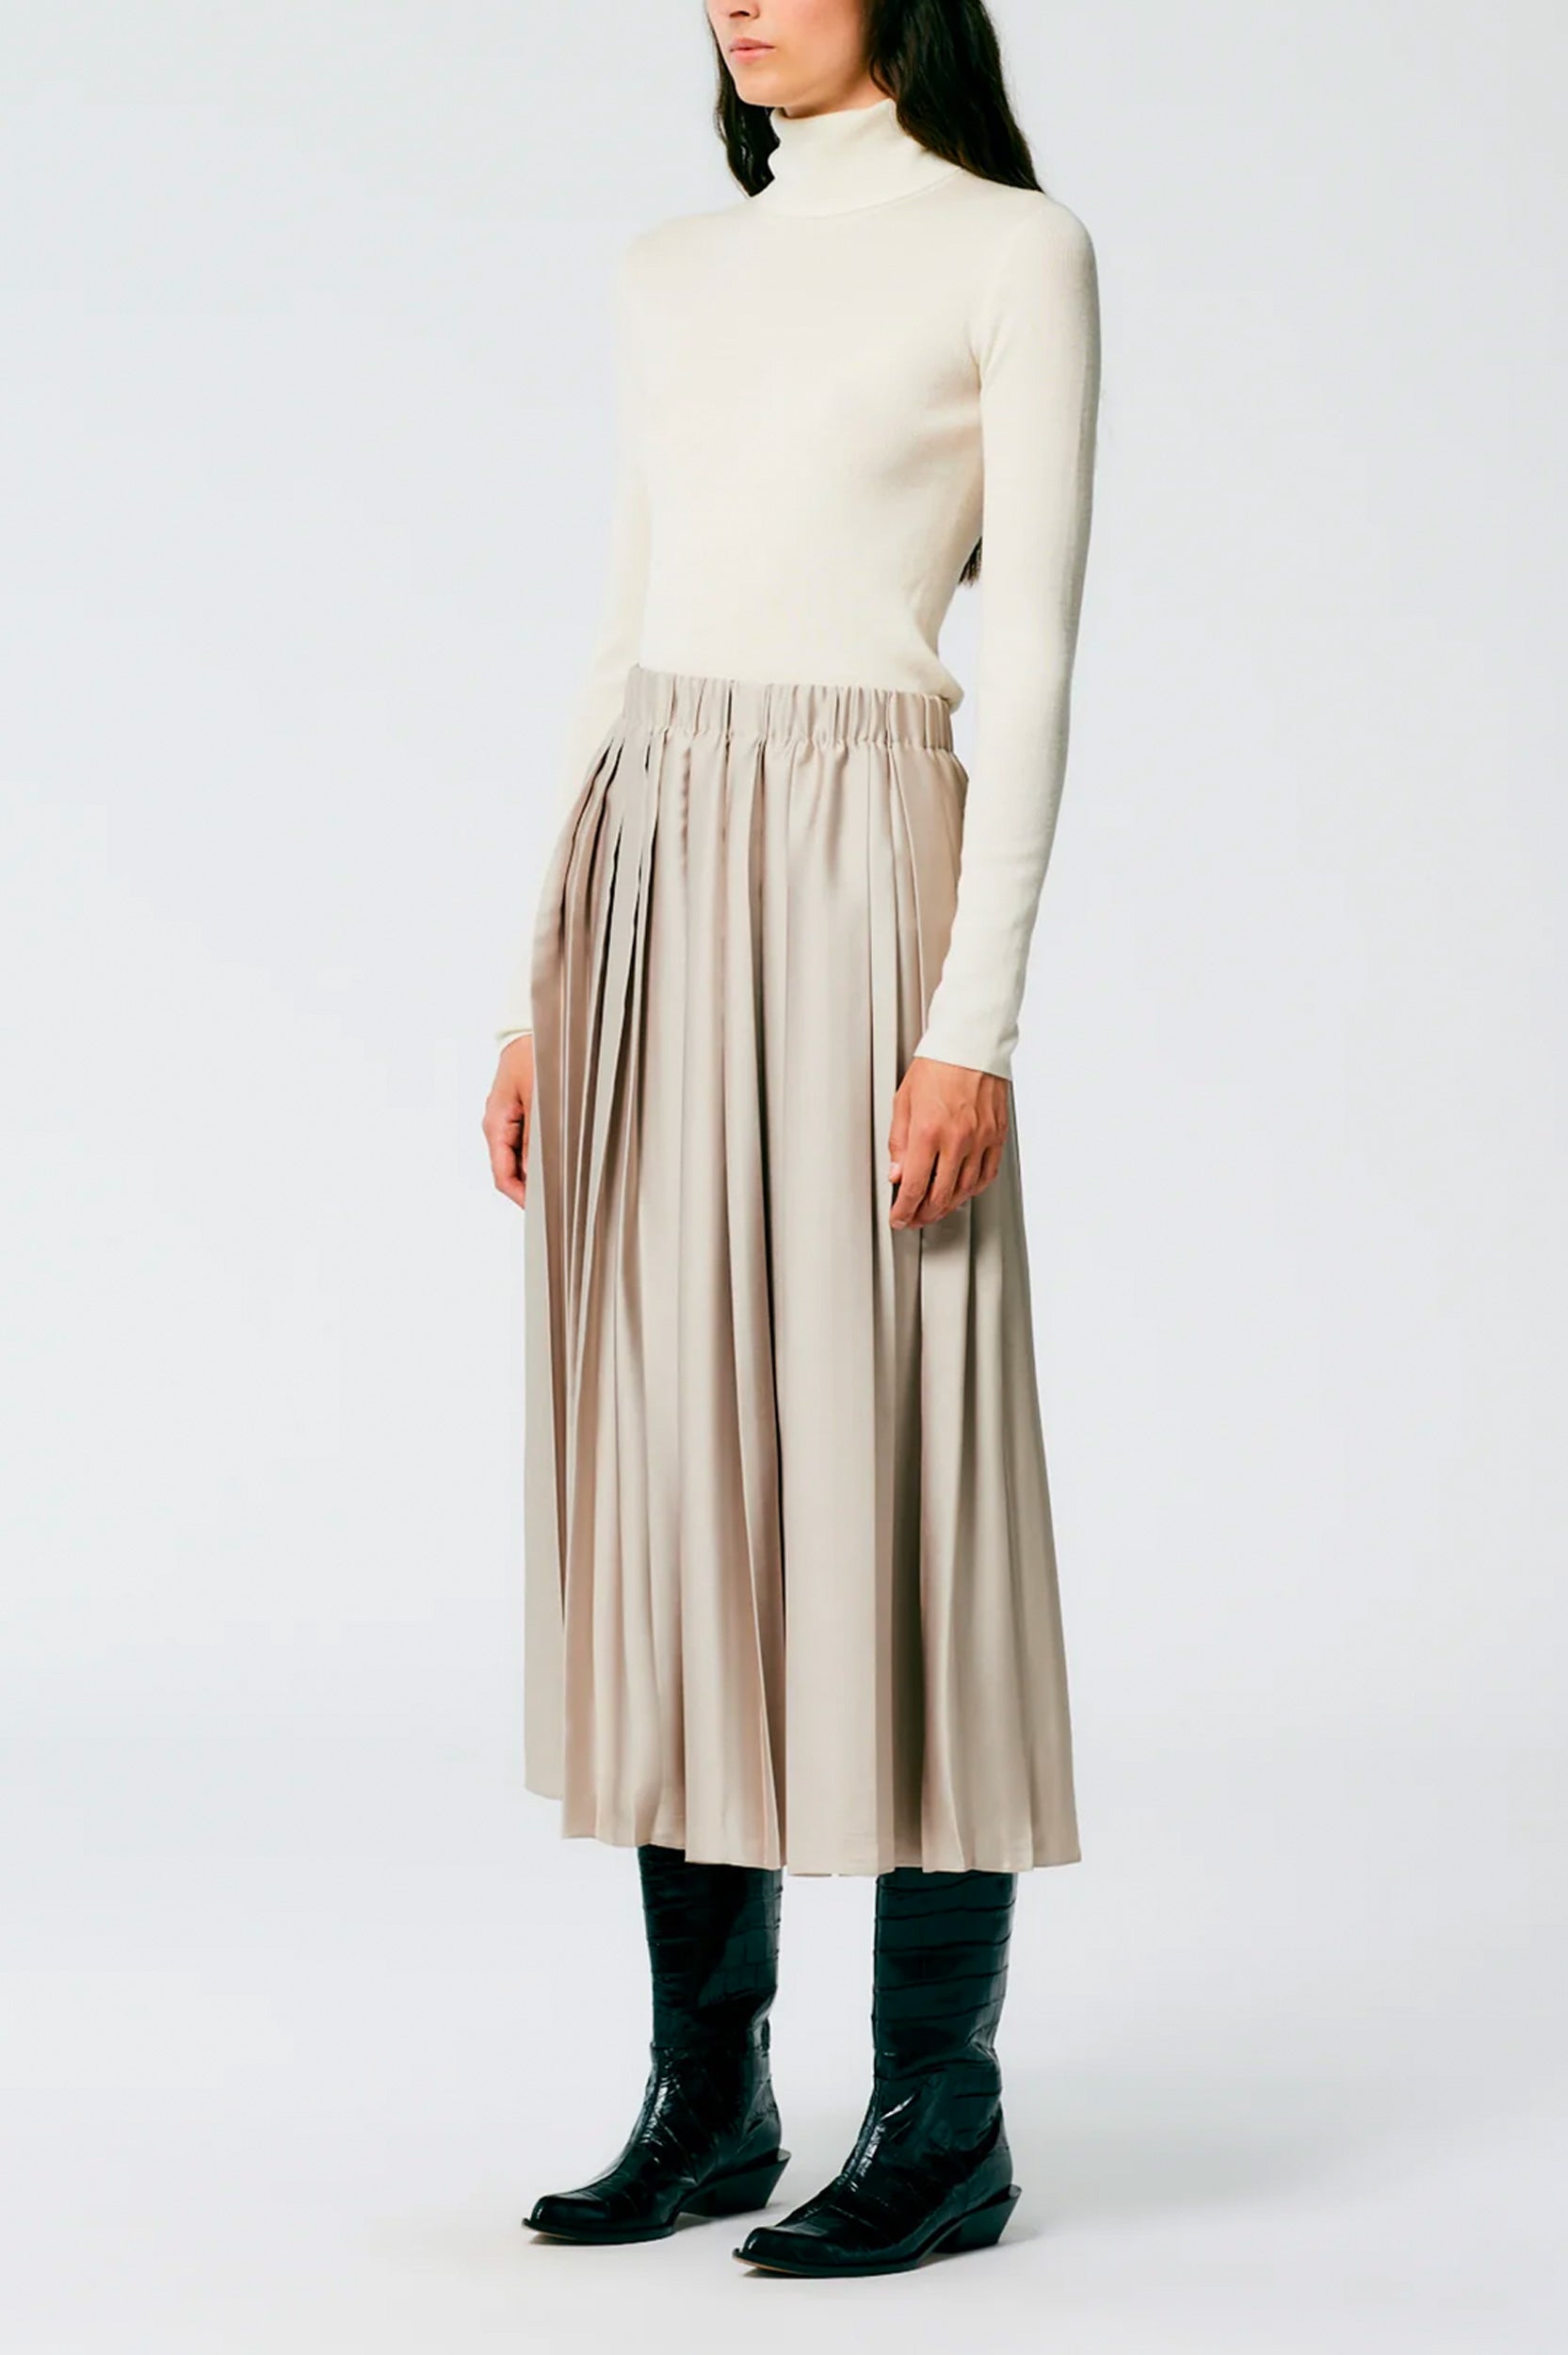 Feather Weight Pleated Skirt in Light Tan